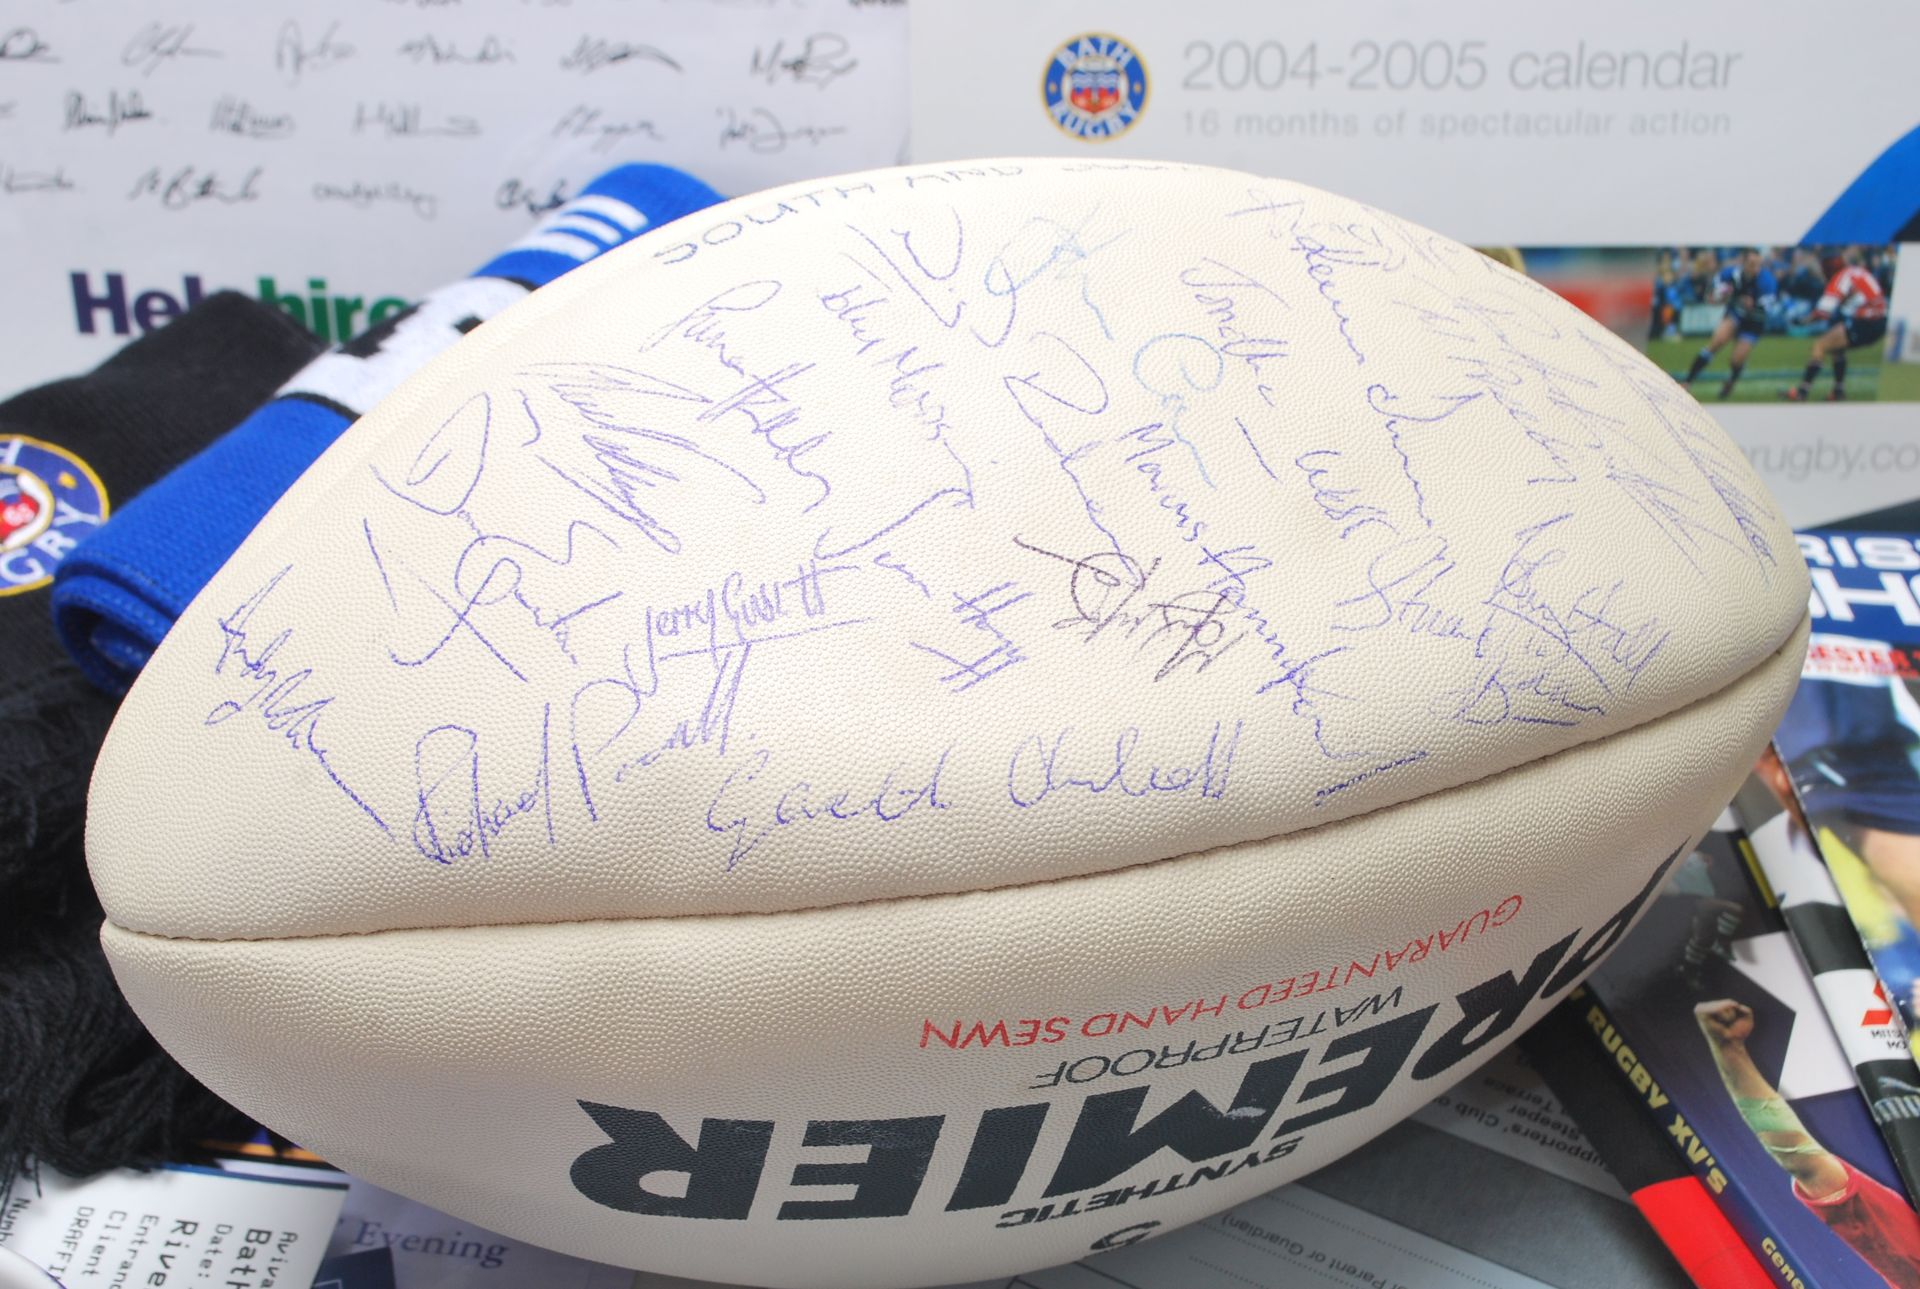 BATH RUGBY AUTOGRAPH - PROGRAMMES - SCARFS - SOUTRH AND SOUTH WEST AUSTRALIA 1988 SIGNED RUGBY BALL - Image 7 of 10